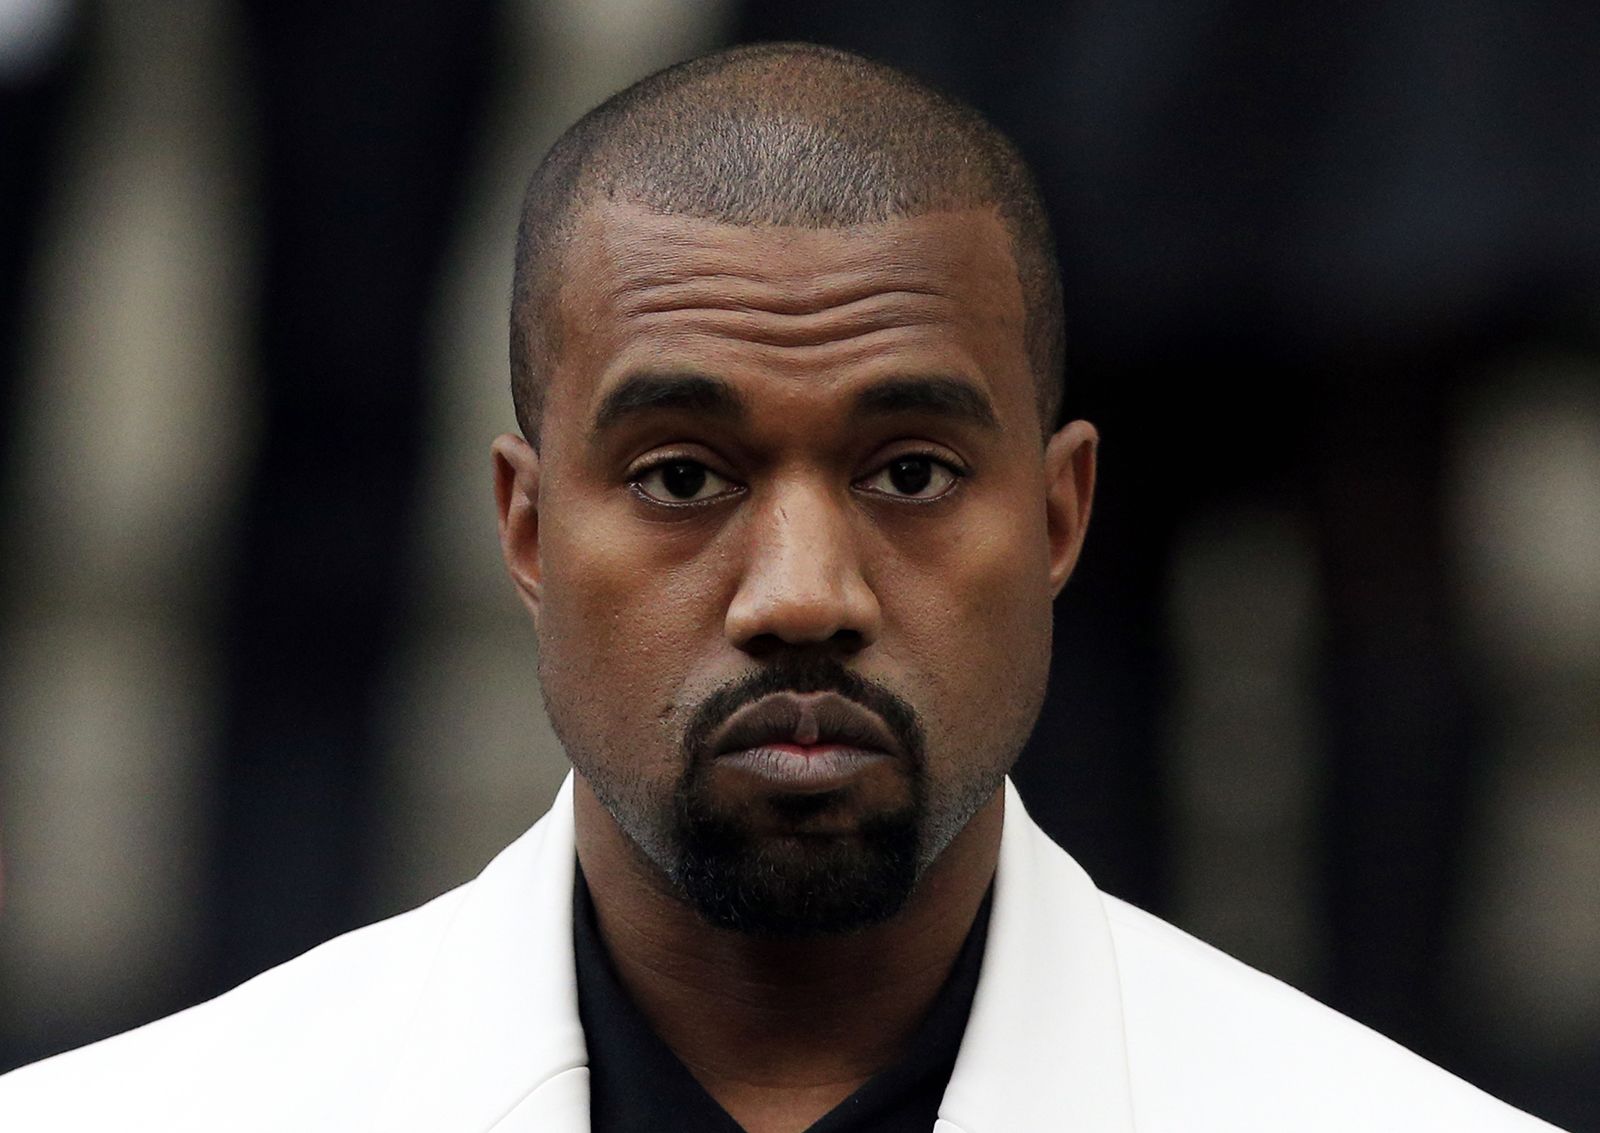 Kanye West's Twitter account has been suspended after Elon Musk says it  violated rule against incitement to violence